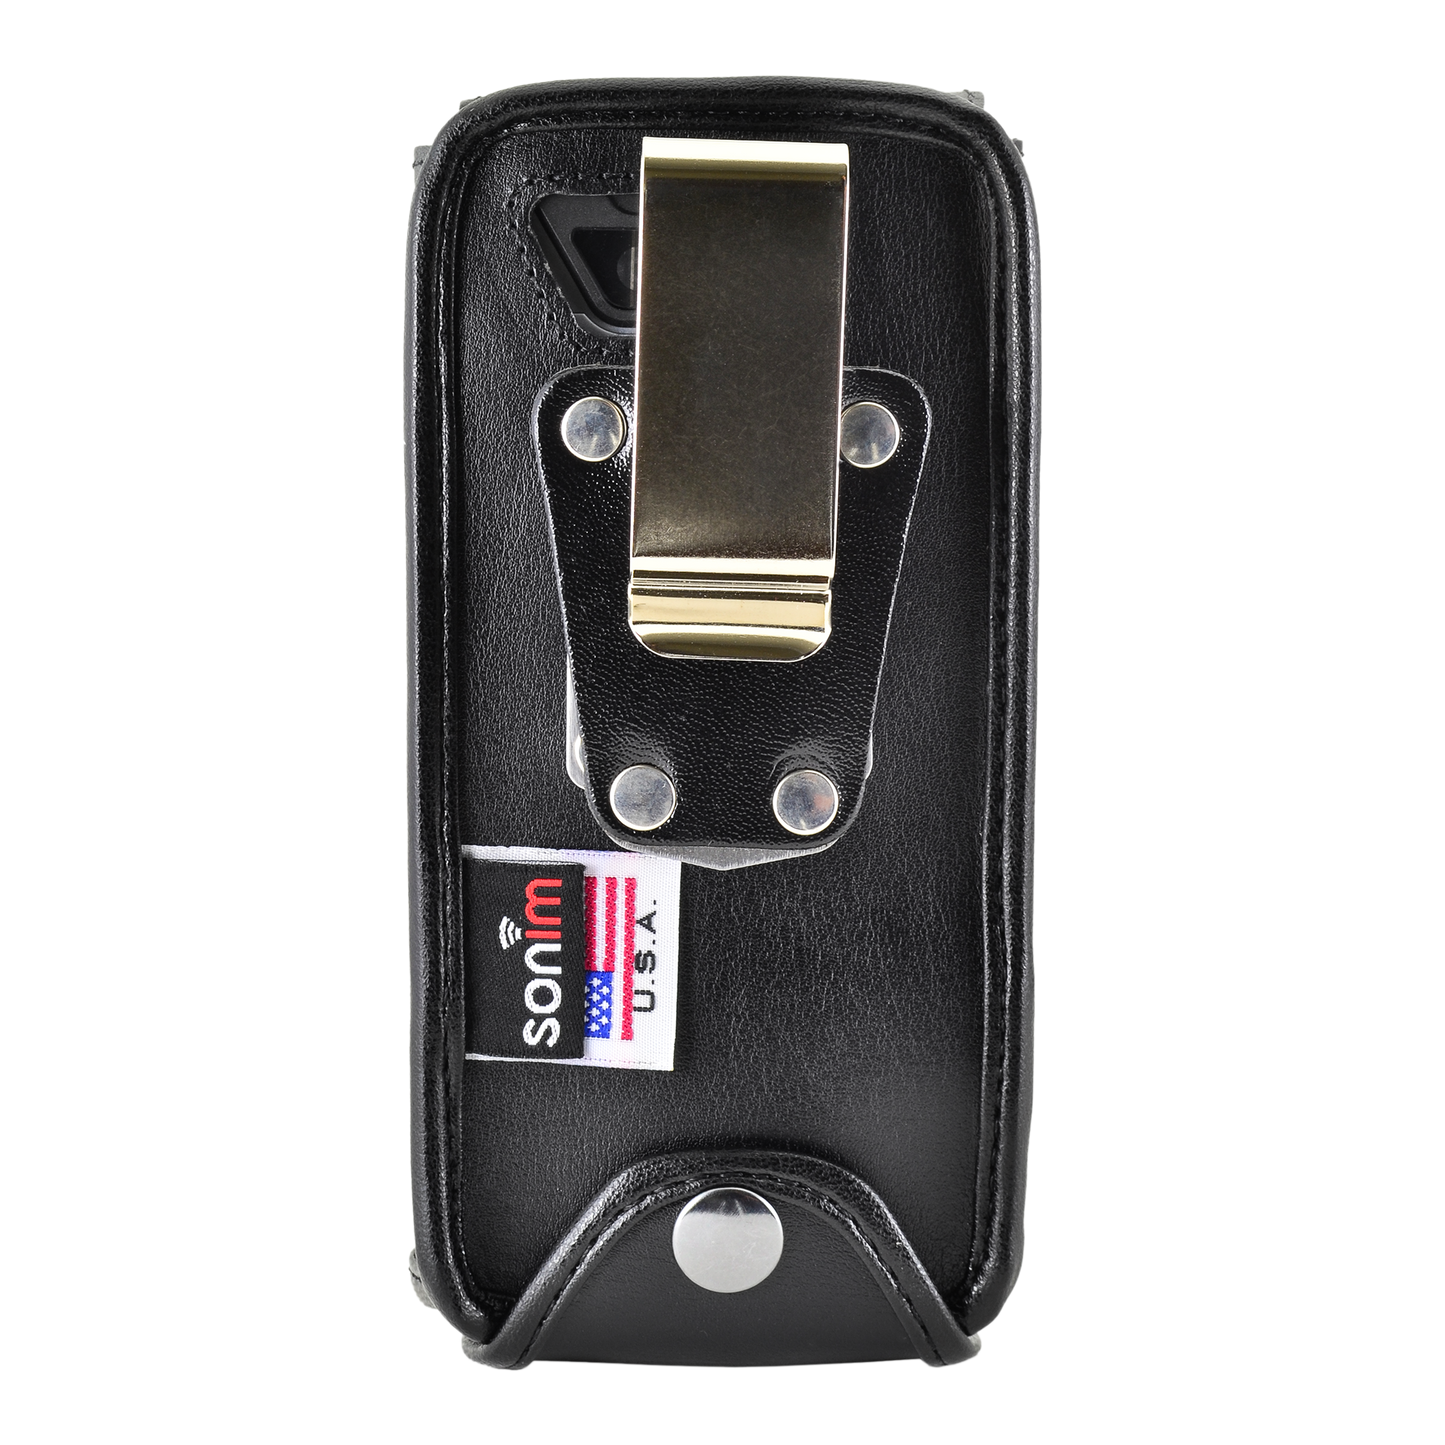 Sonim carrying case for XP5s with metal clip. 